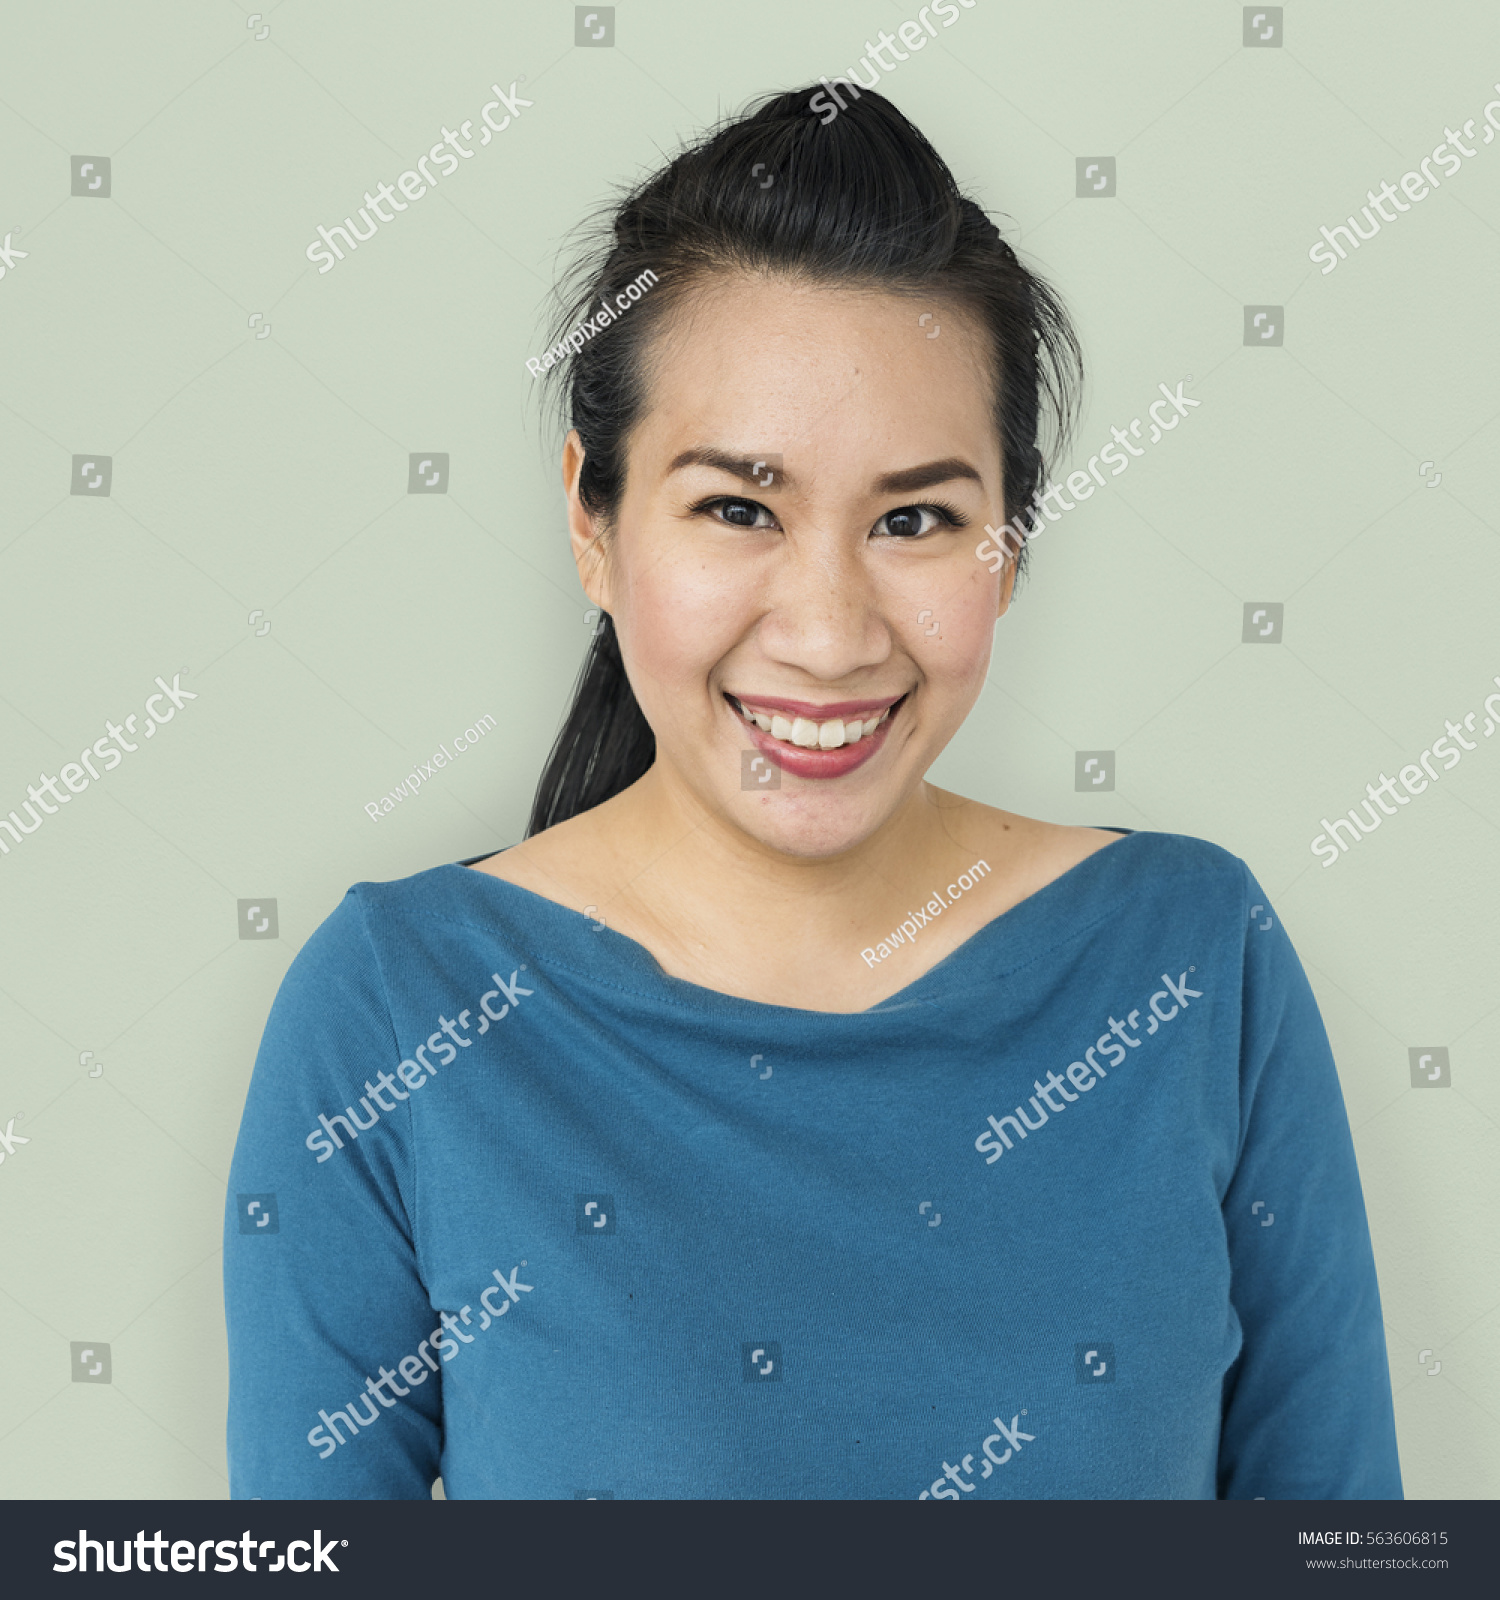 Asian Adult Casual Cheerful Beauty Concept Stock Photo 563606815 ...